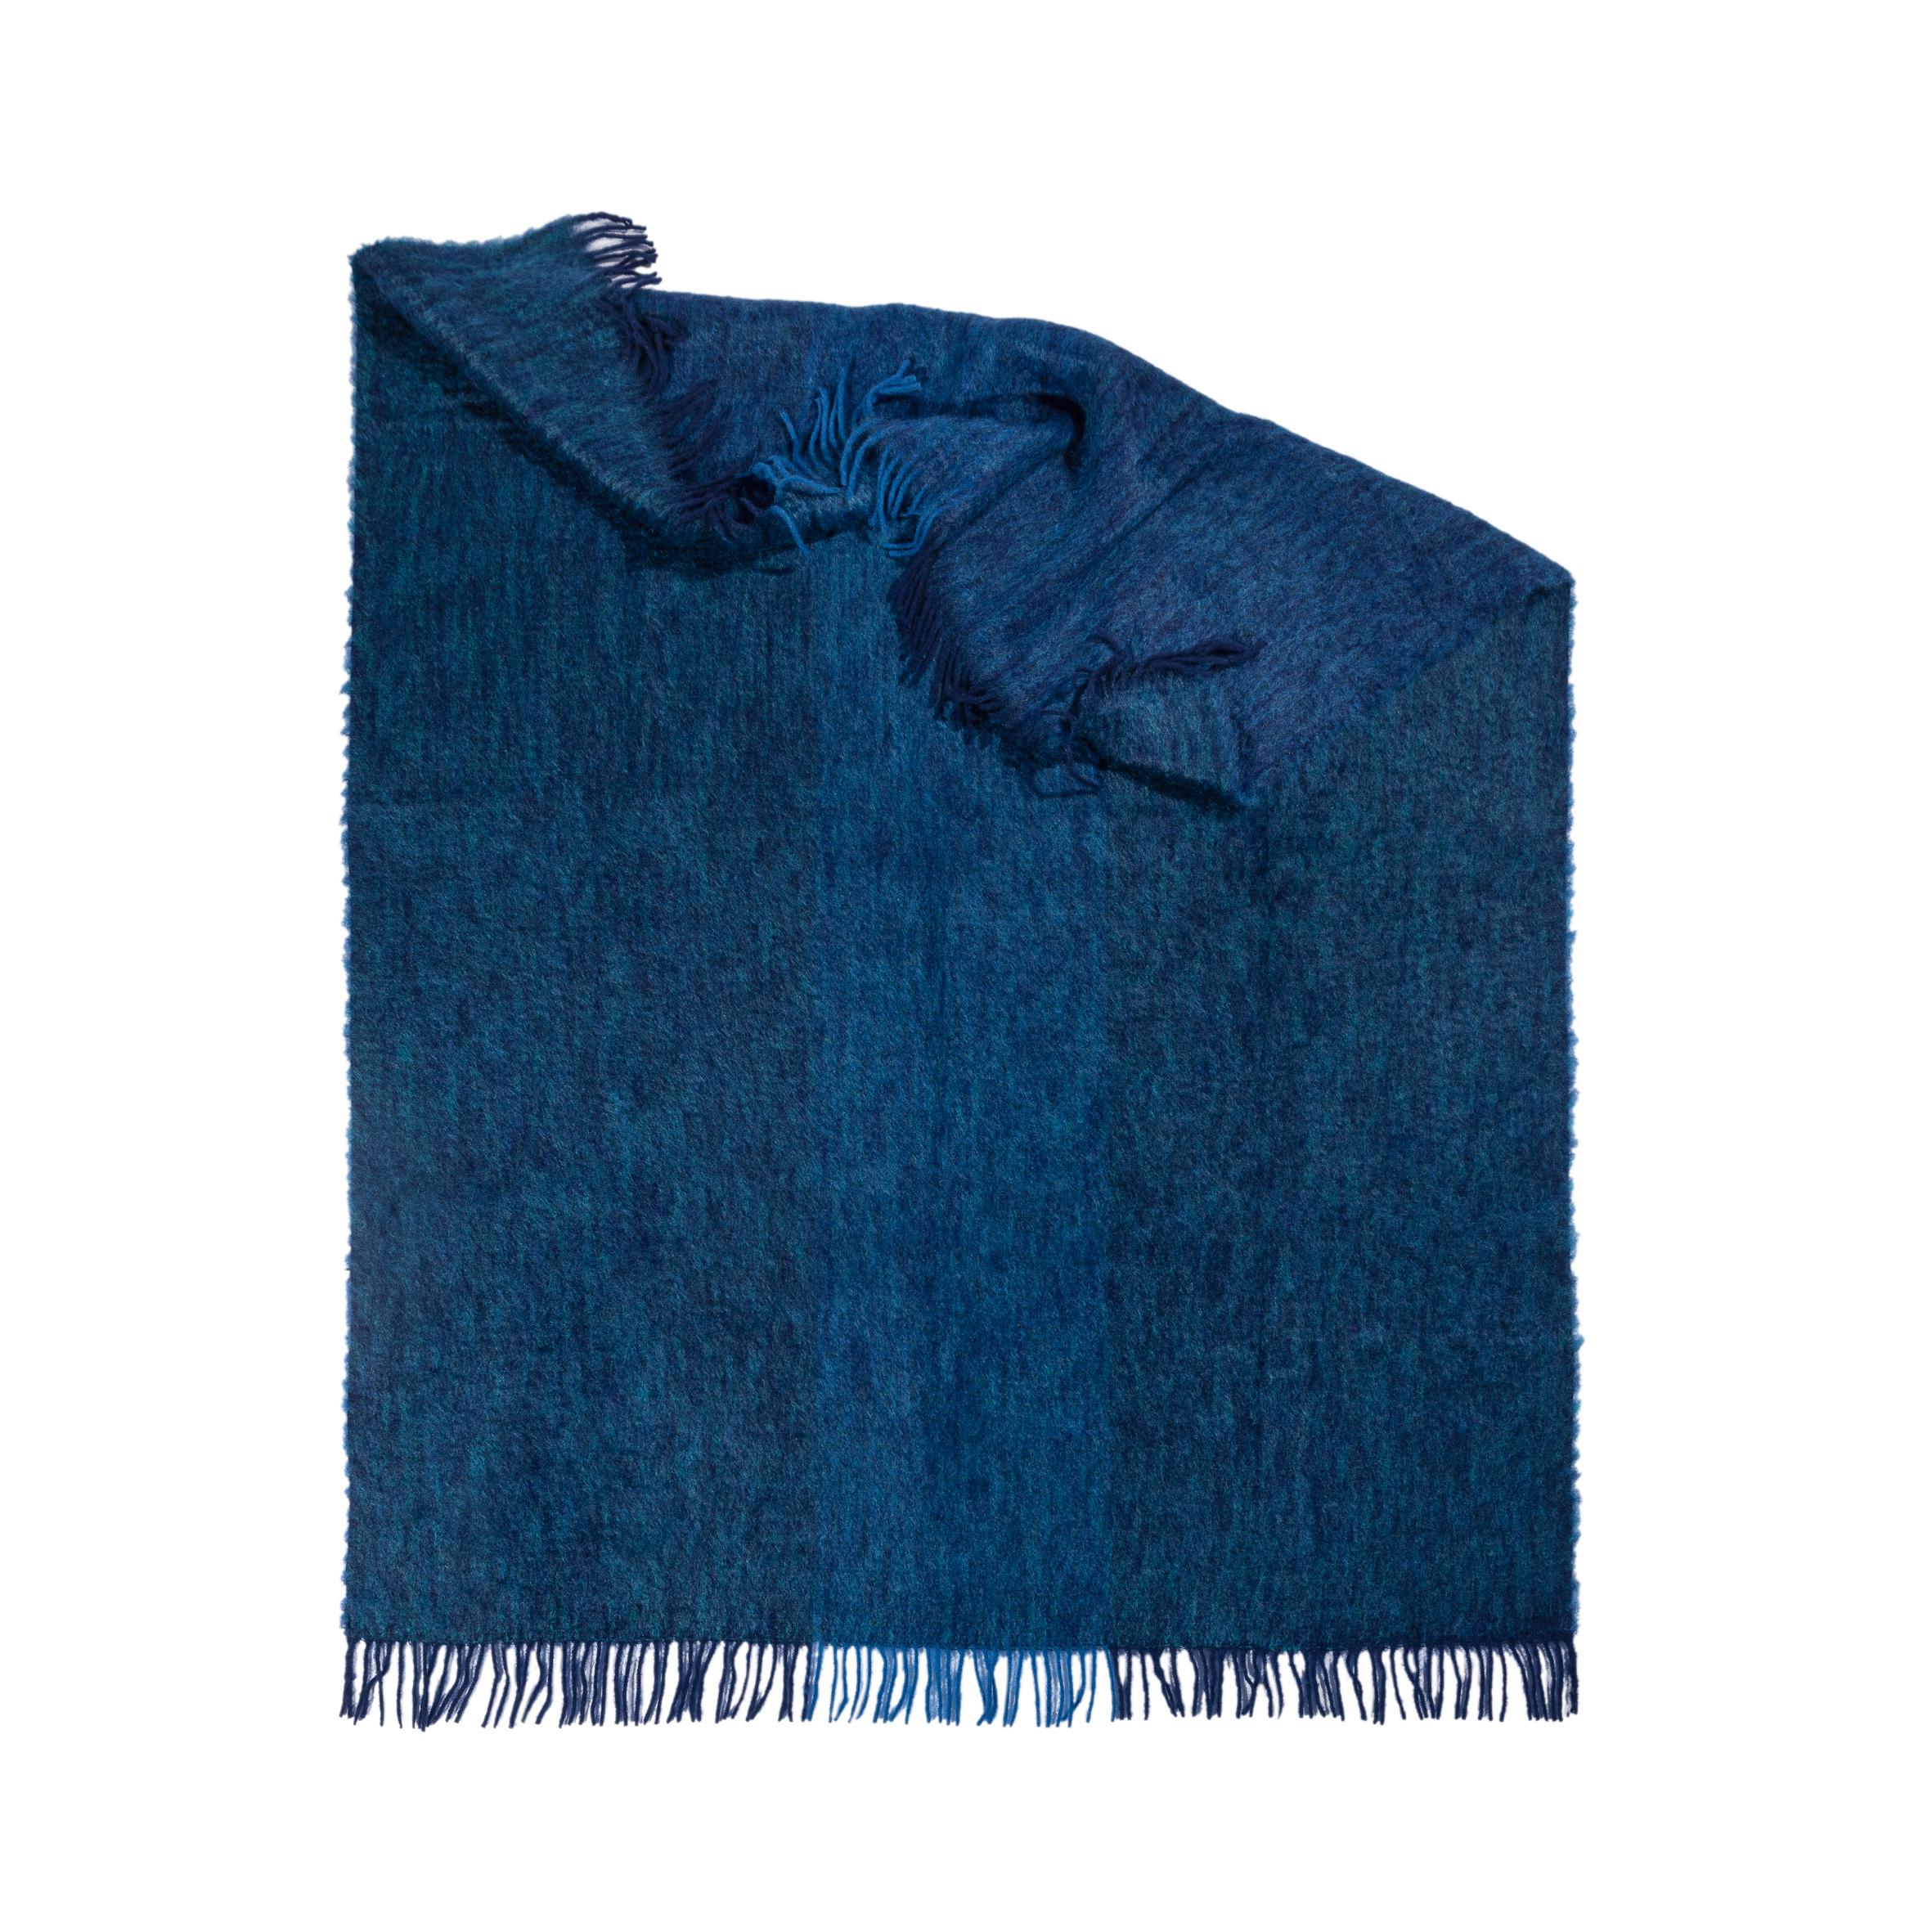 Spanish Mohair Blanket Blue Woven of Mohair and Wool by Catharina Mende For Sale